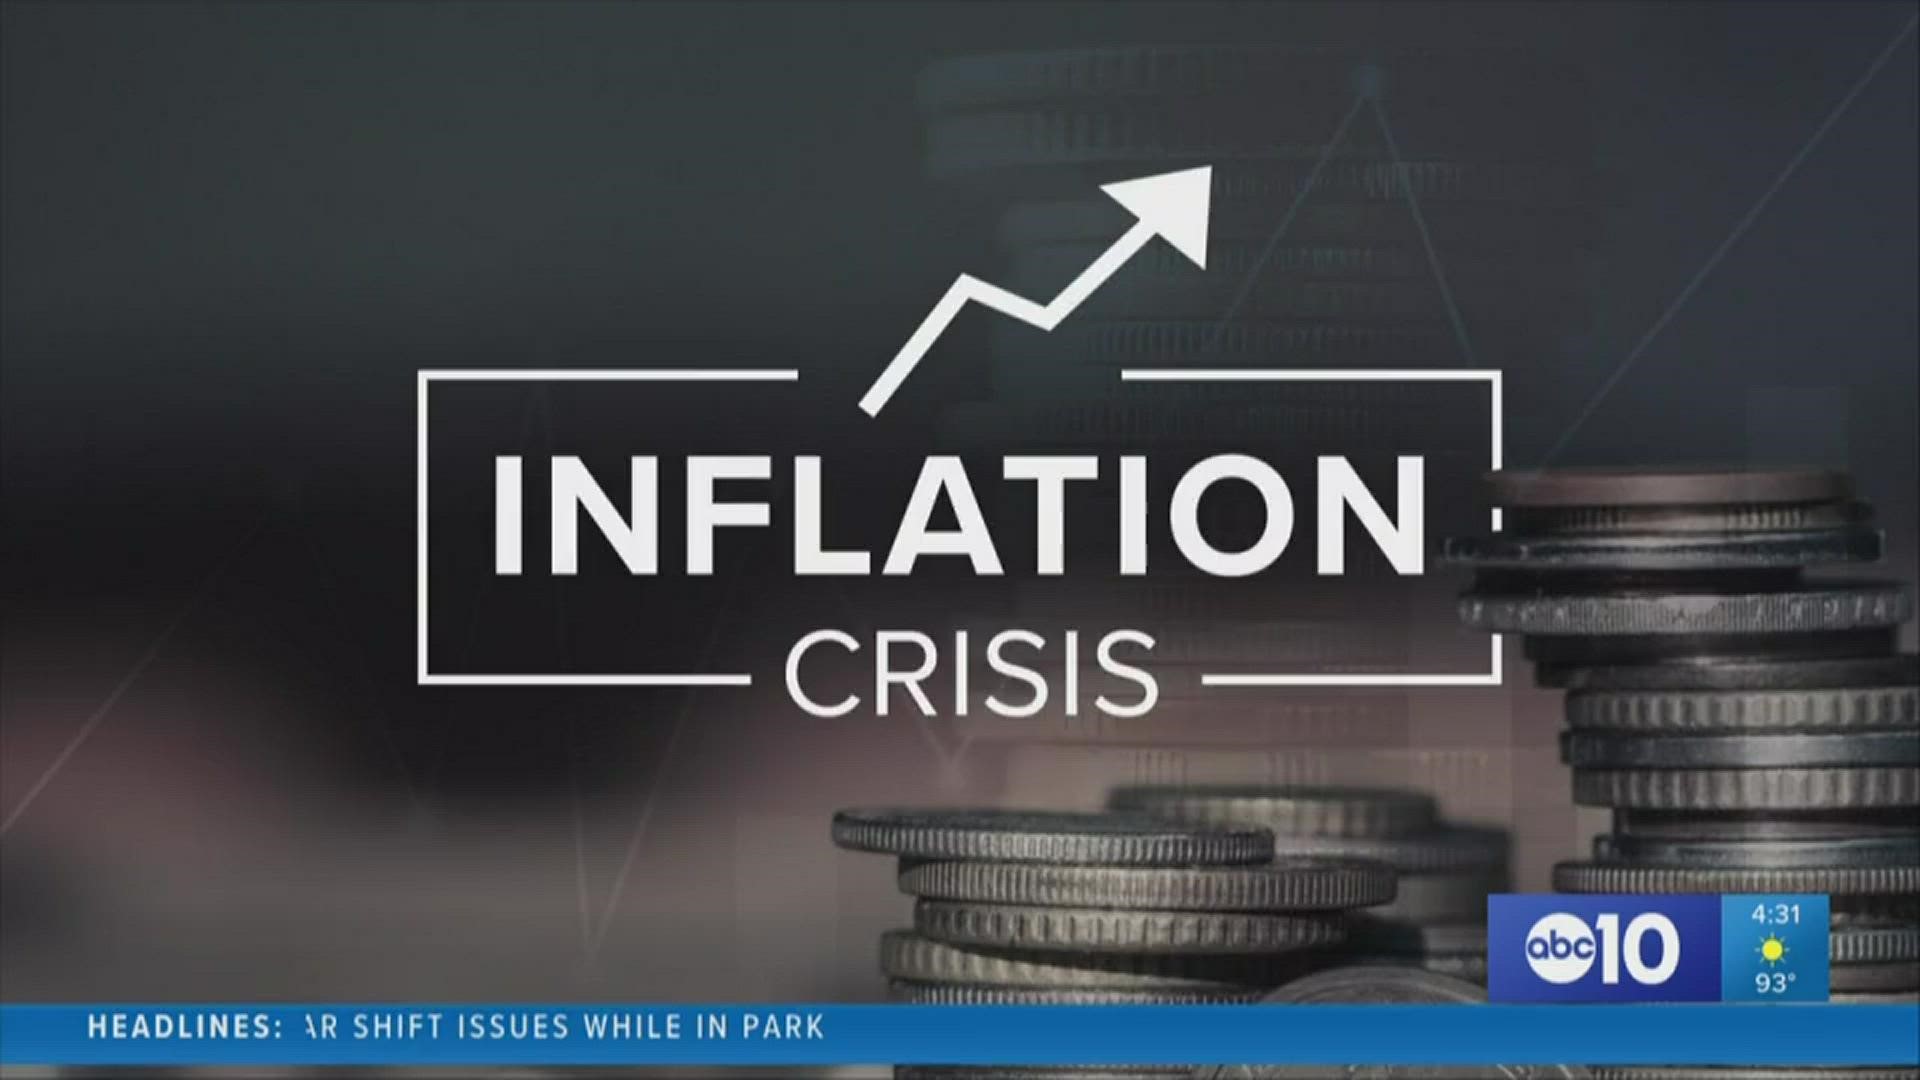 Being the third rate increase from the U.S. Federal Reserve, the FED chair said they hope to bring down inflation but not throw the economy into a recession.